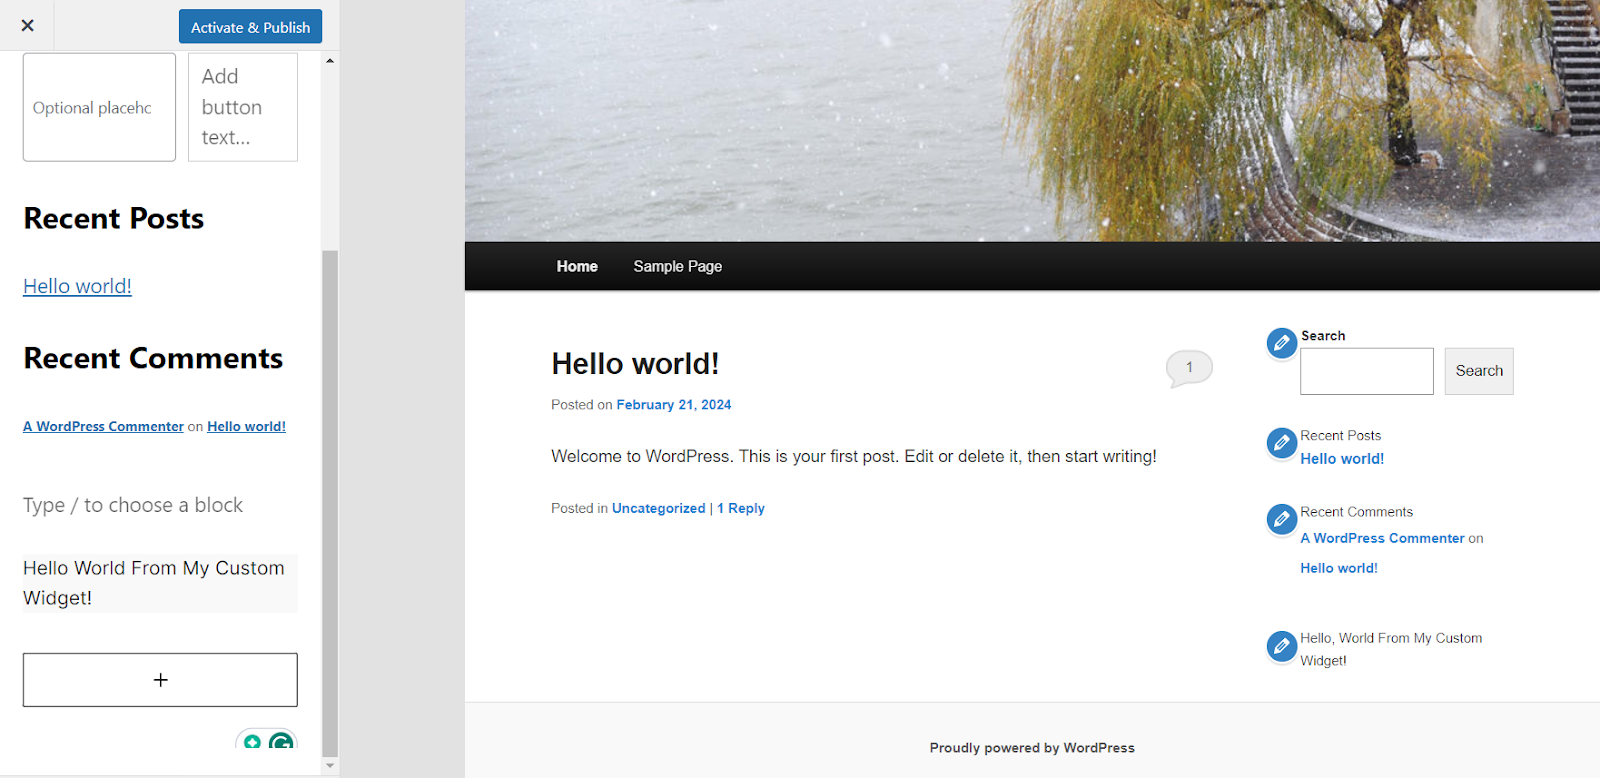 Screenshot of the WordPress site's landing page. The left-hand side of the page has a menu outlining recent posts and recent comments, with an Activate & Publish button